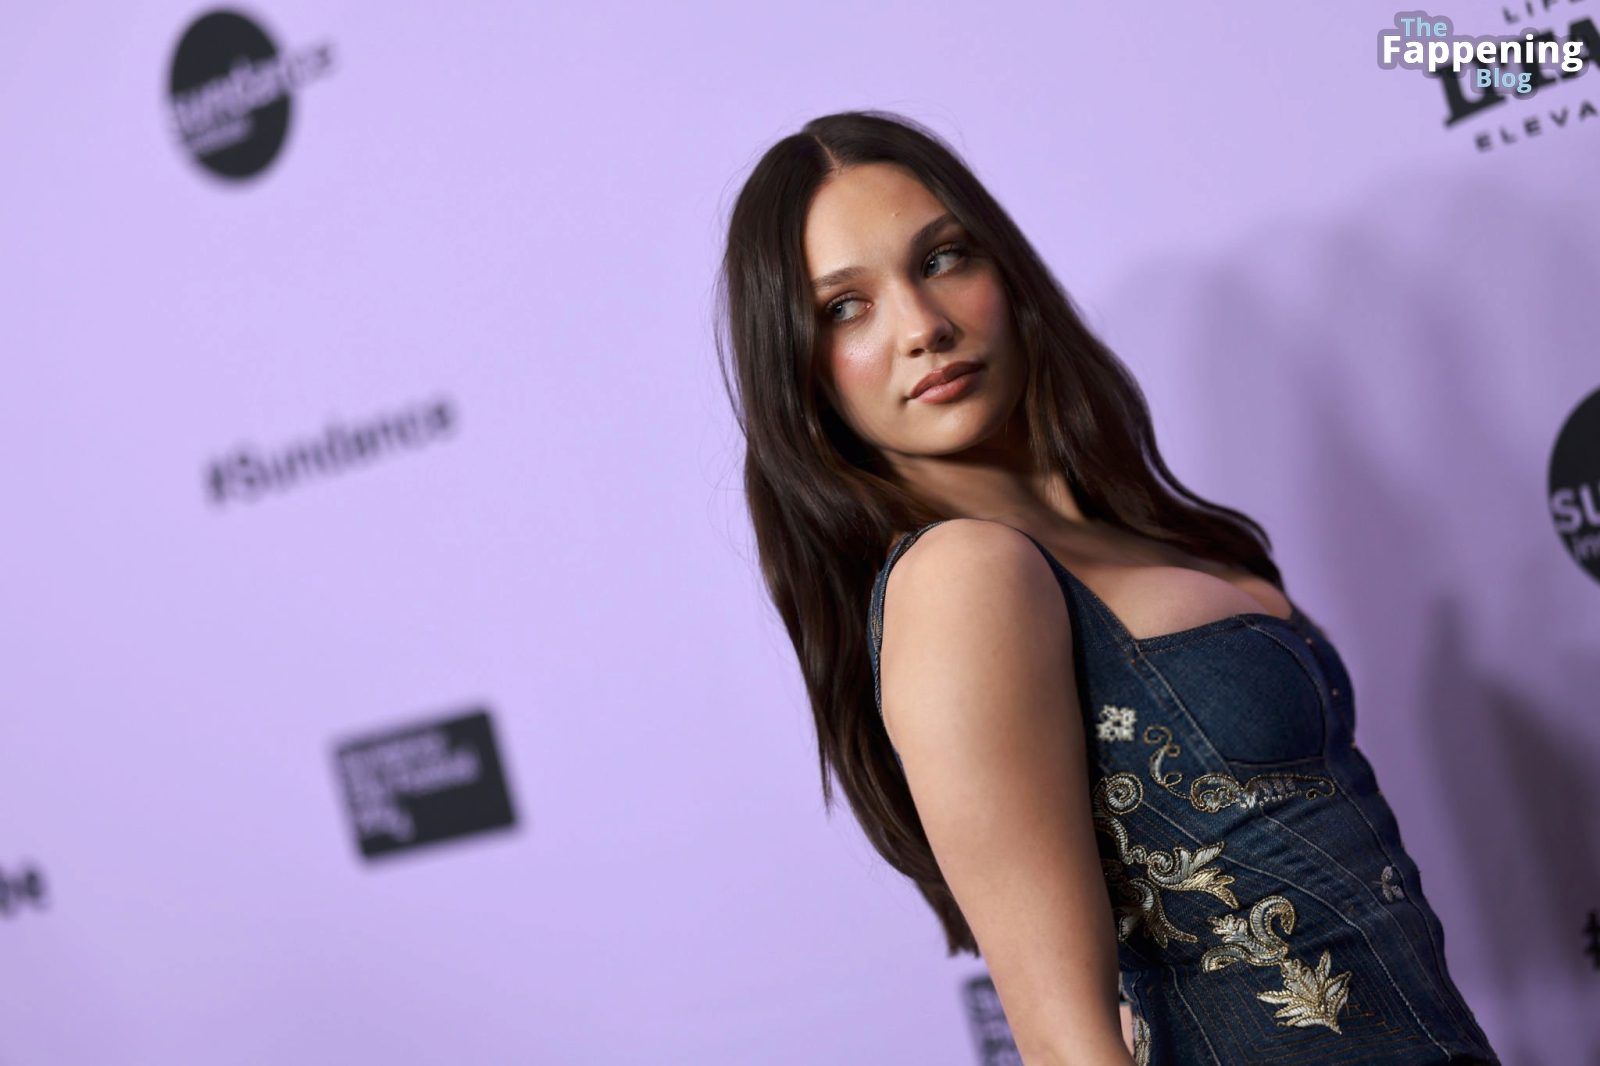 Maddie-Ziegler-My-Old-Ass-Premiere-Sexy-Cleavage-8-thefappeningblog.com_.jpg